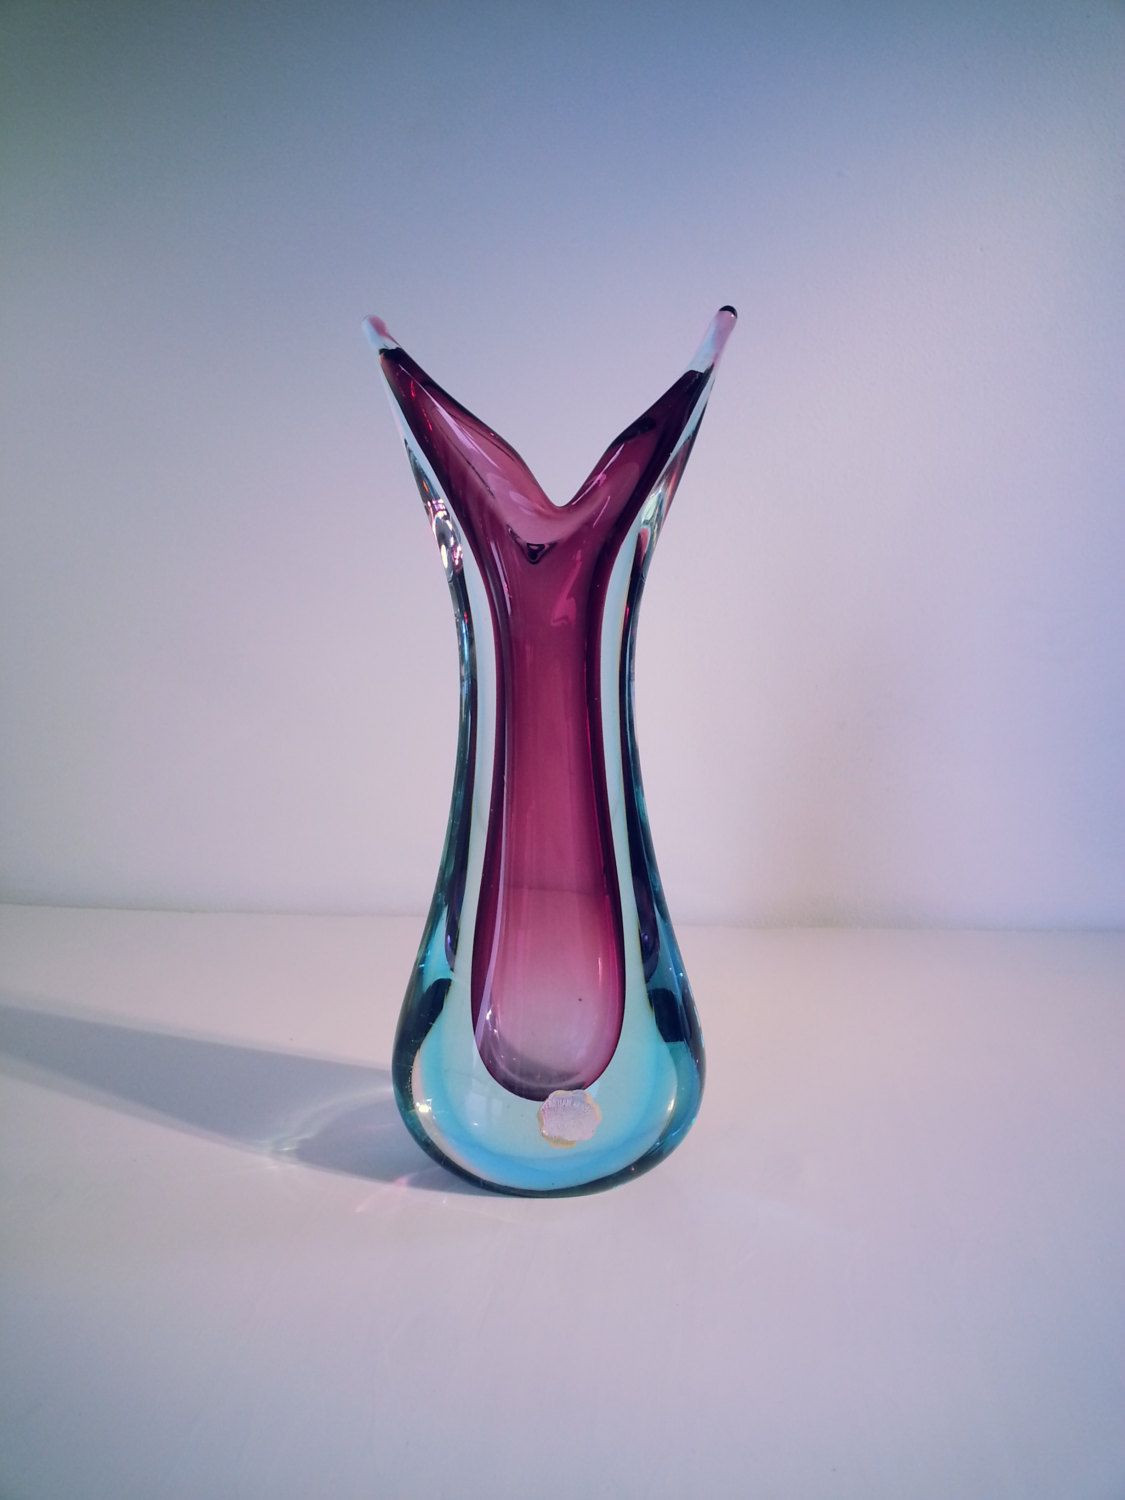 20 Popular Cracked Glass Vase 2024 free download cracked glass vase of image of italian glass vase vases artificial plants collection with regard to italian glass vase photos murano sommerso genuine venetian glass 1950 s 1960s purple blue 